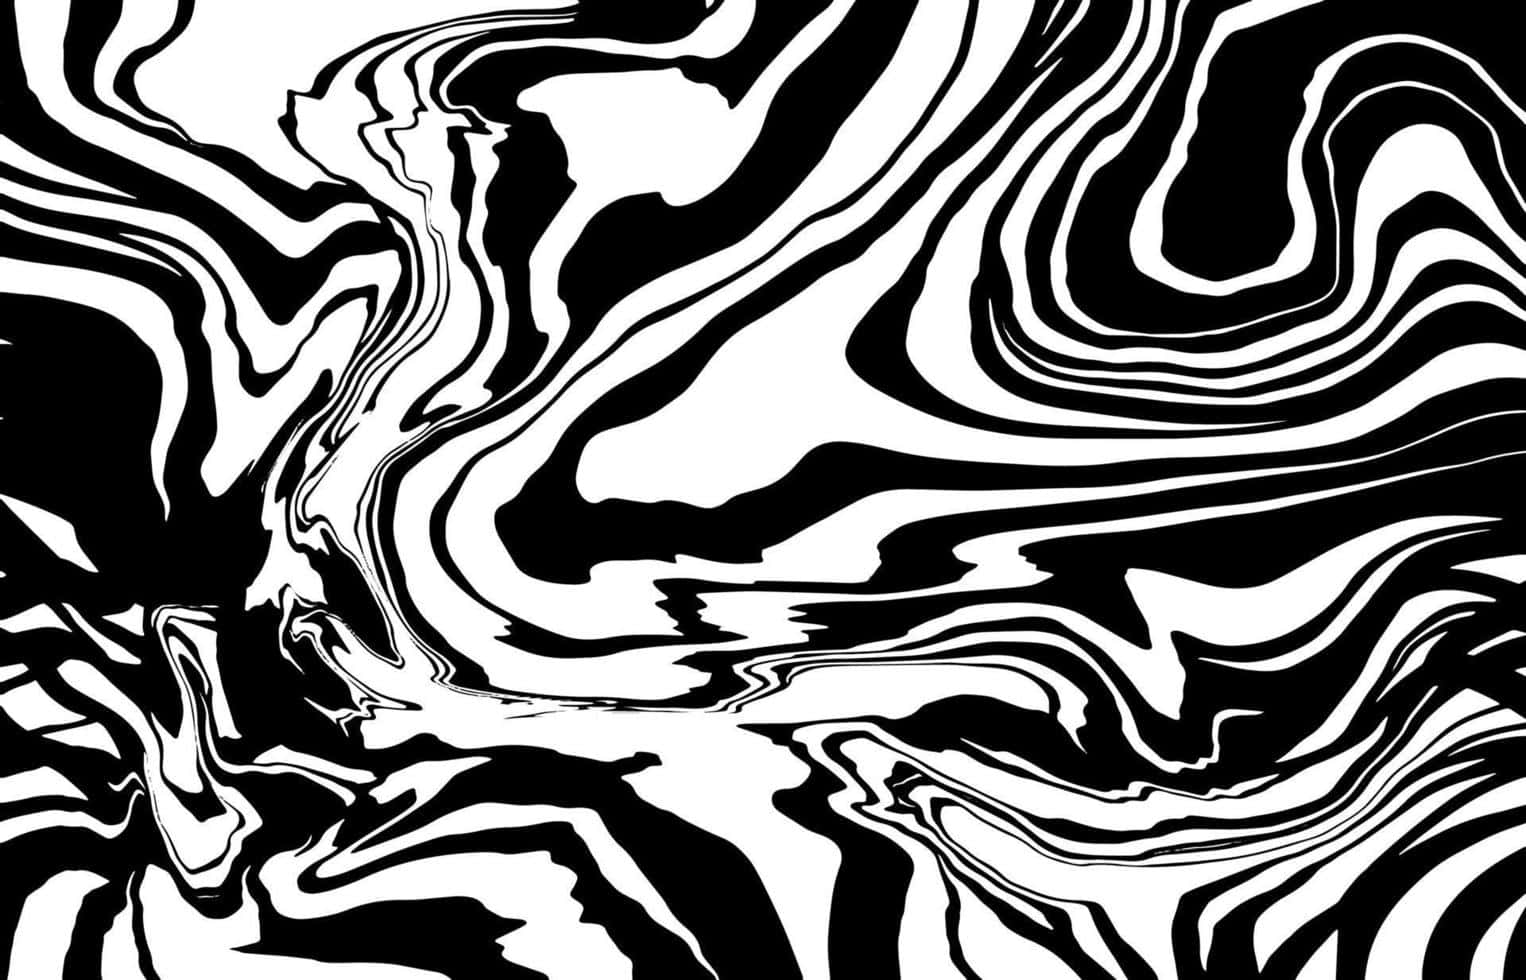 A Black And White Abstract Painting With Swirls